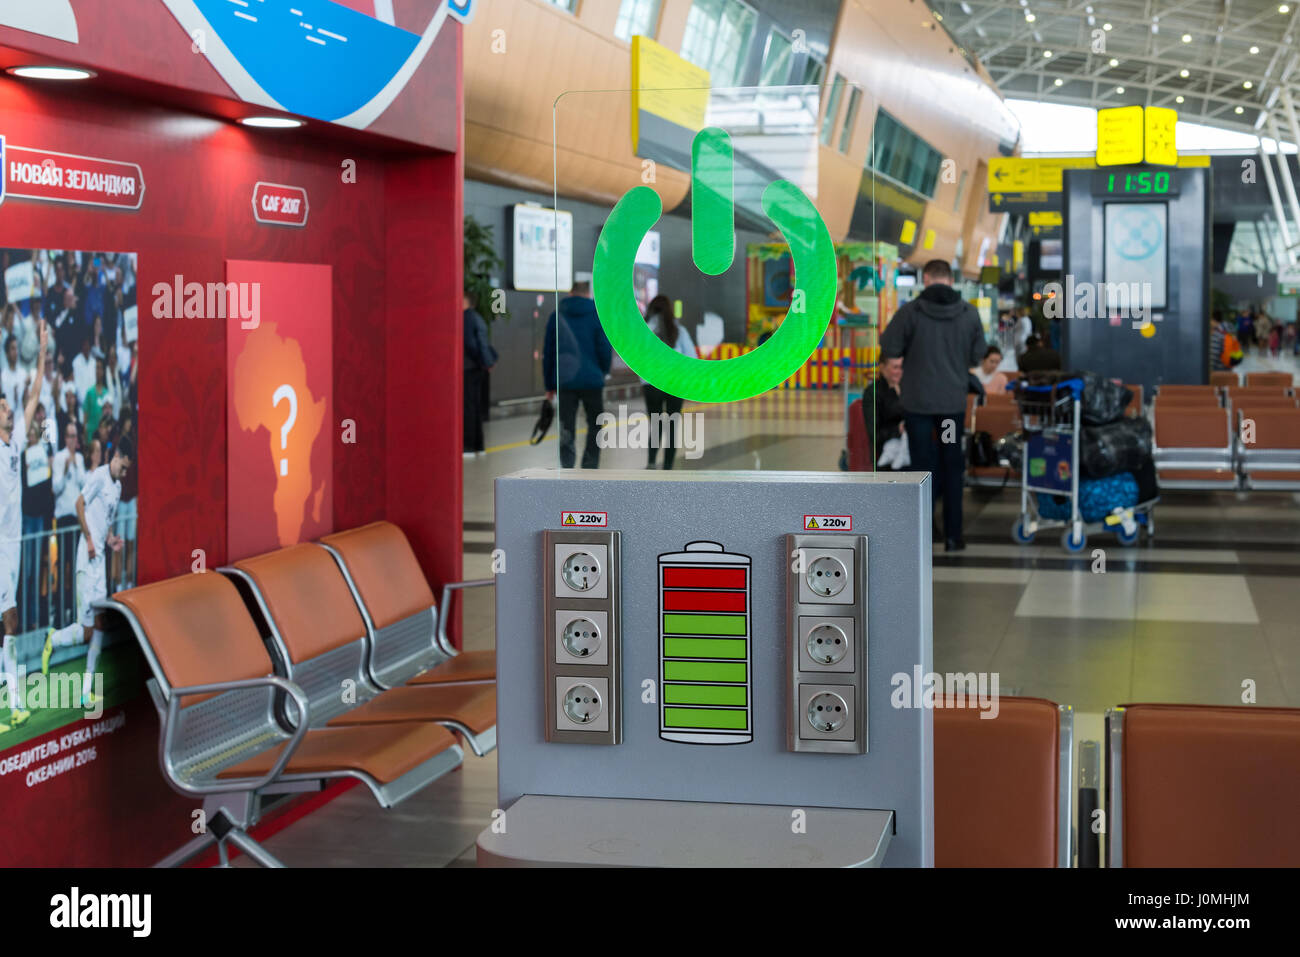 Kazan, Russia - March 25.2017. Free charging in the airport in the departure zone Stock Photo